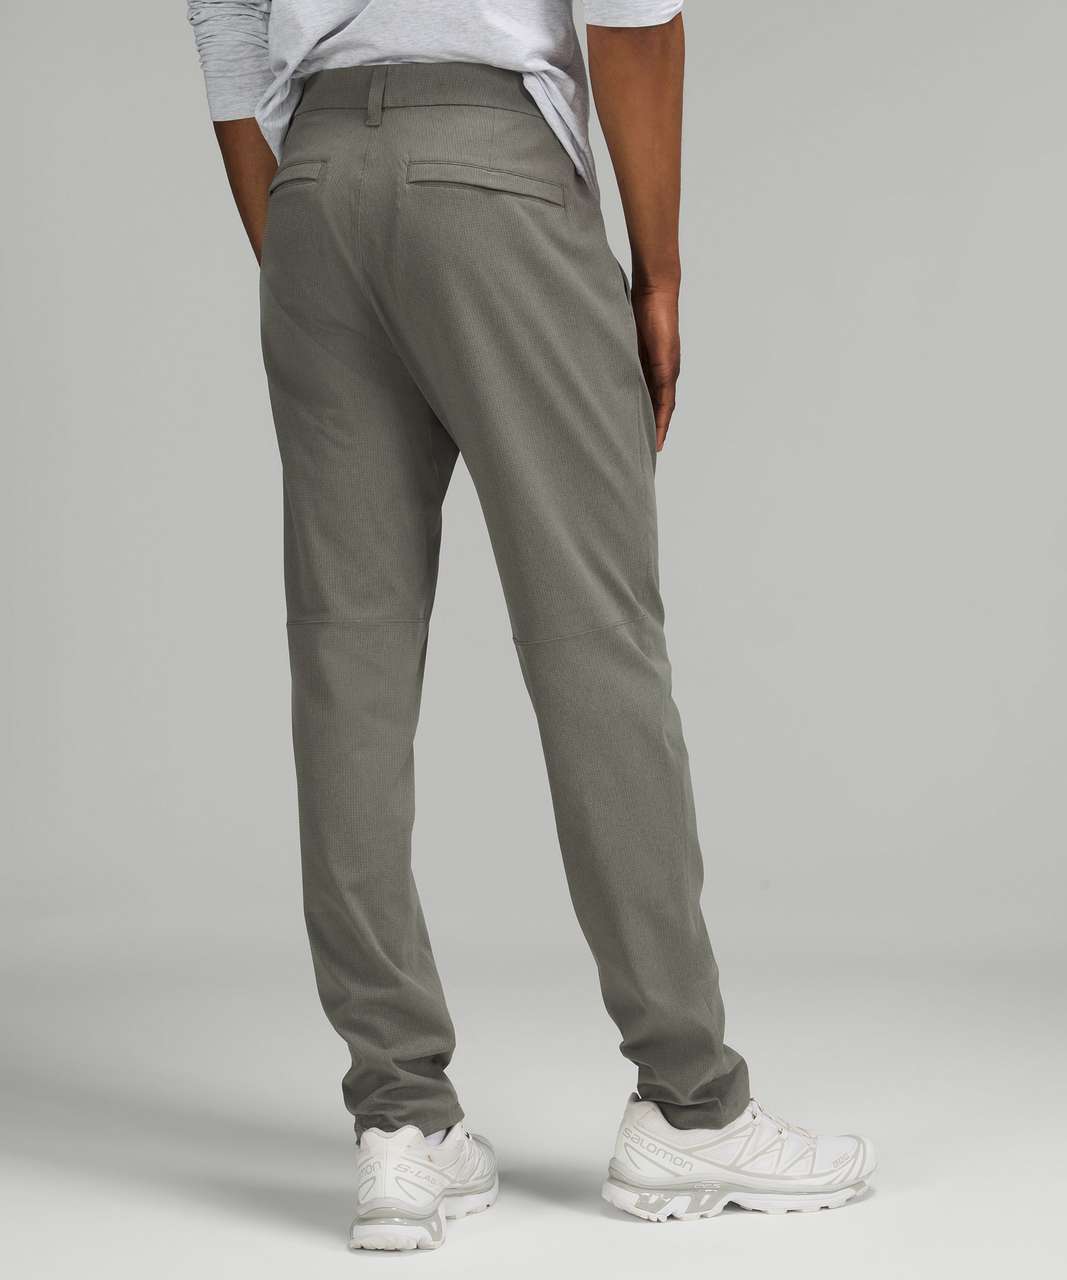 Commission Pant Slim 34”L *Canvas in Graphite Grey size 30W / ABC Pant Slim  34”L *Dye in Washed Grey Sage size 30W : r/lululemon